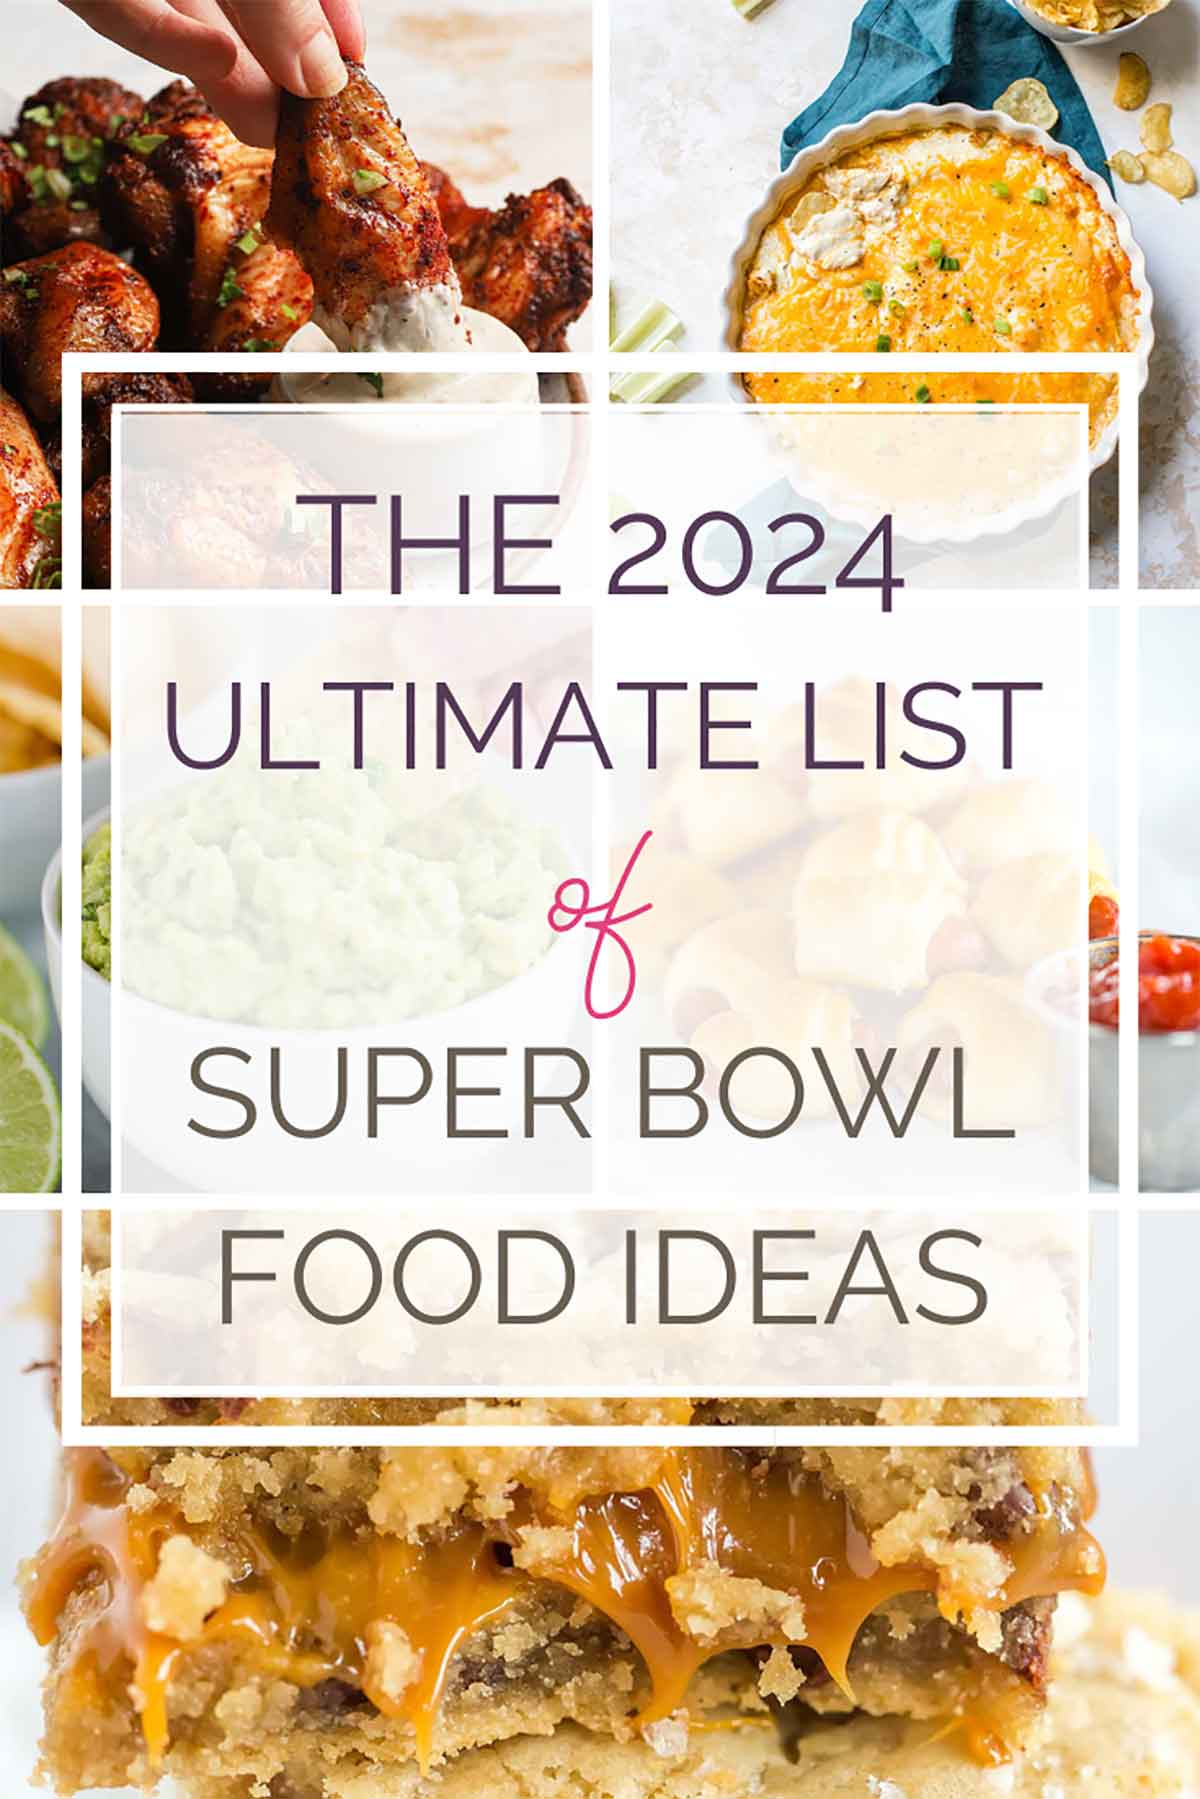 Image grid of football food with text overlay "The 2024 Ultimate List of Super Bowl Food Ideas".